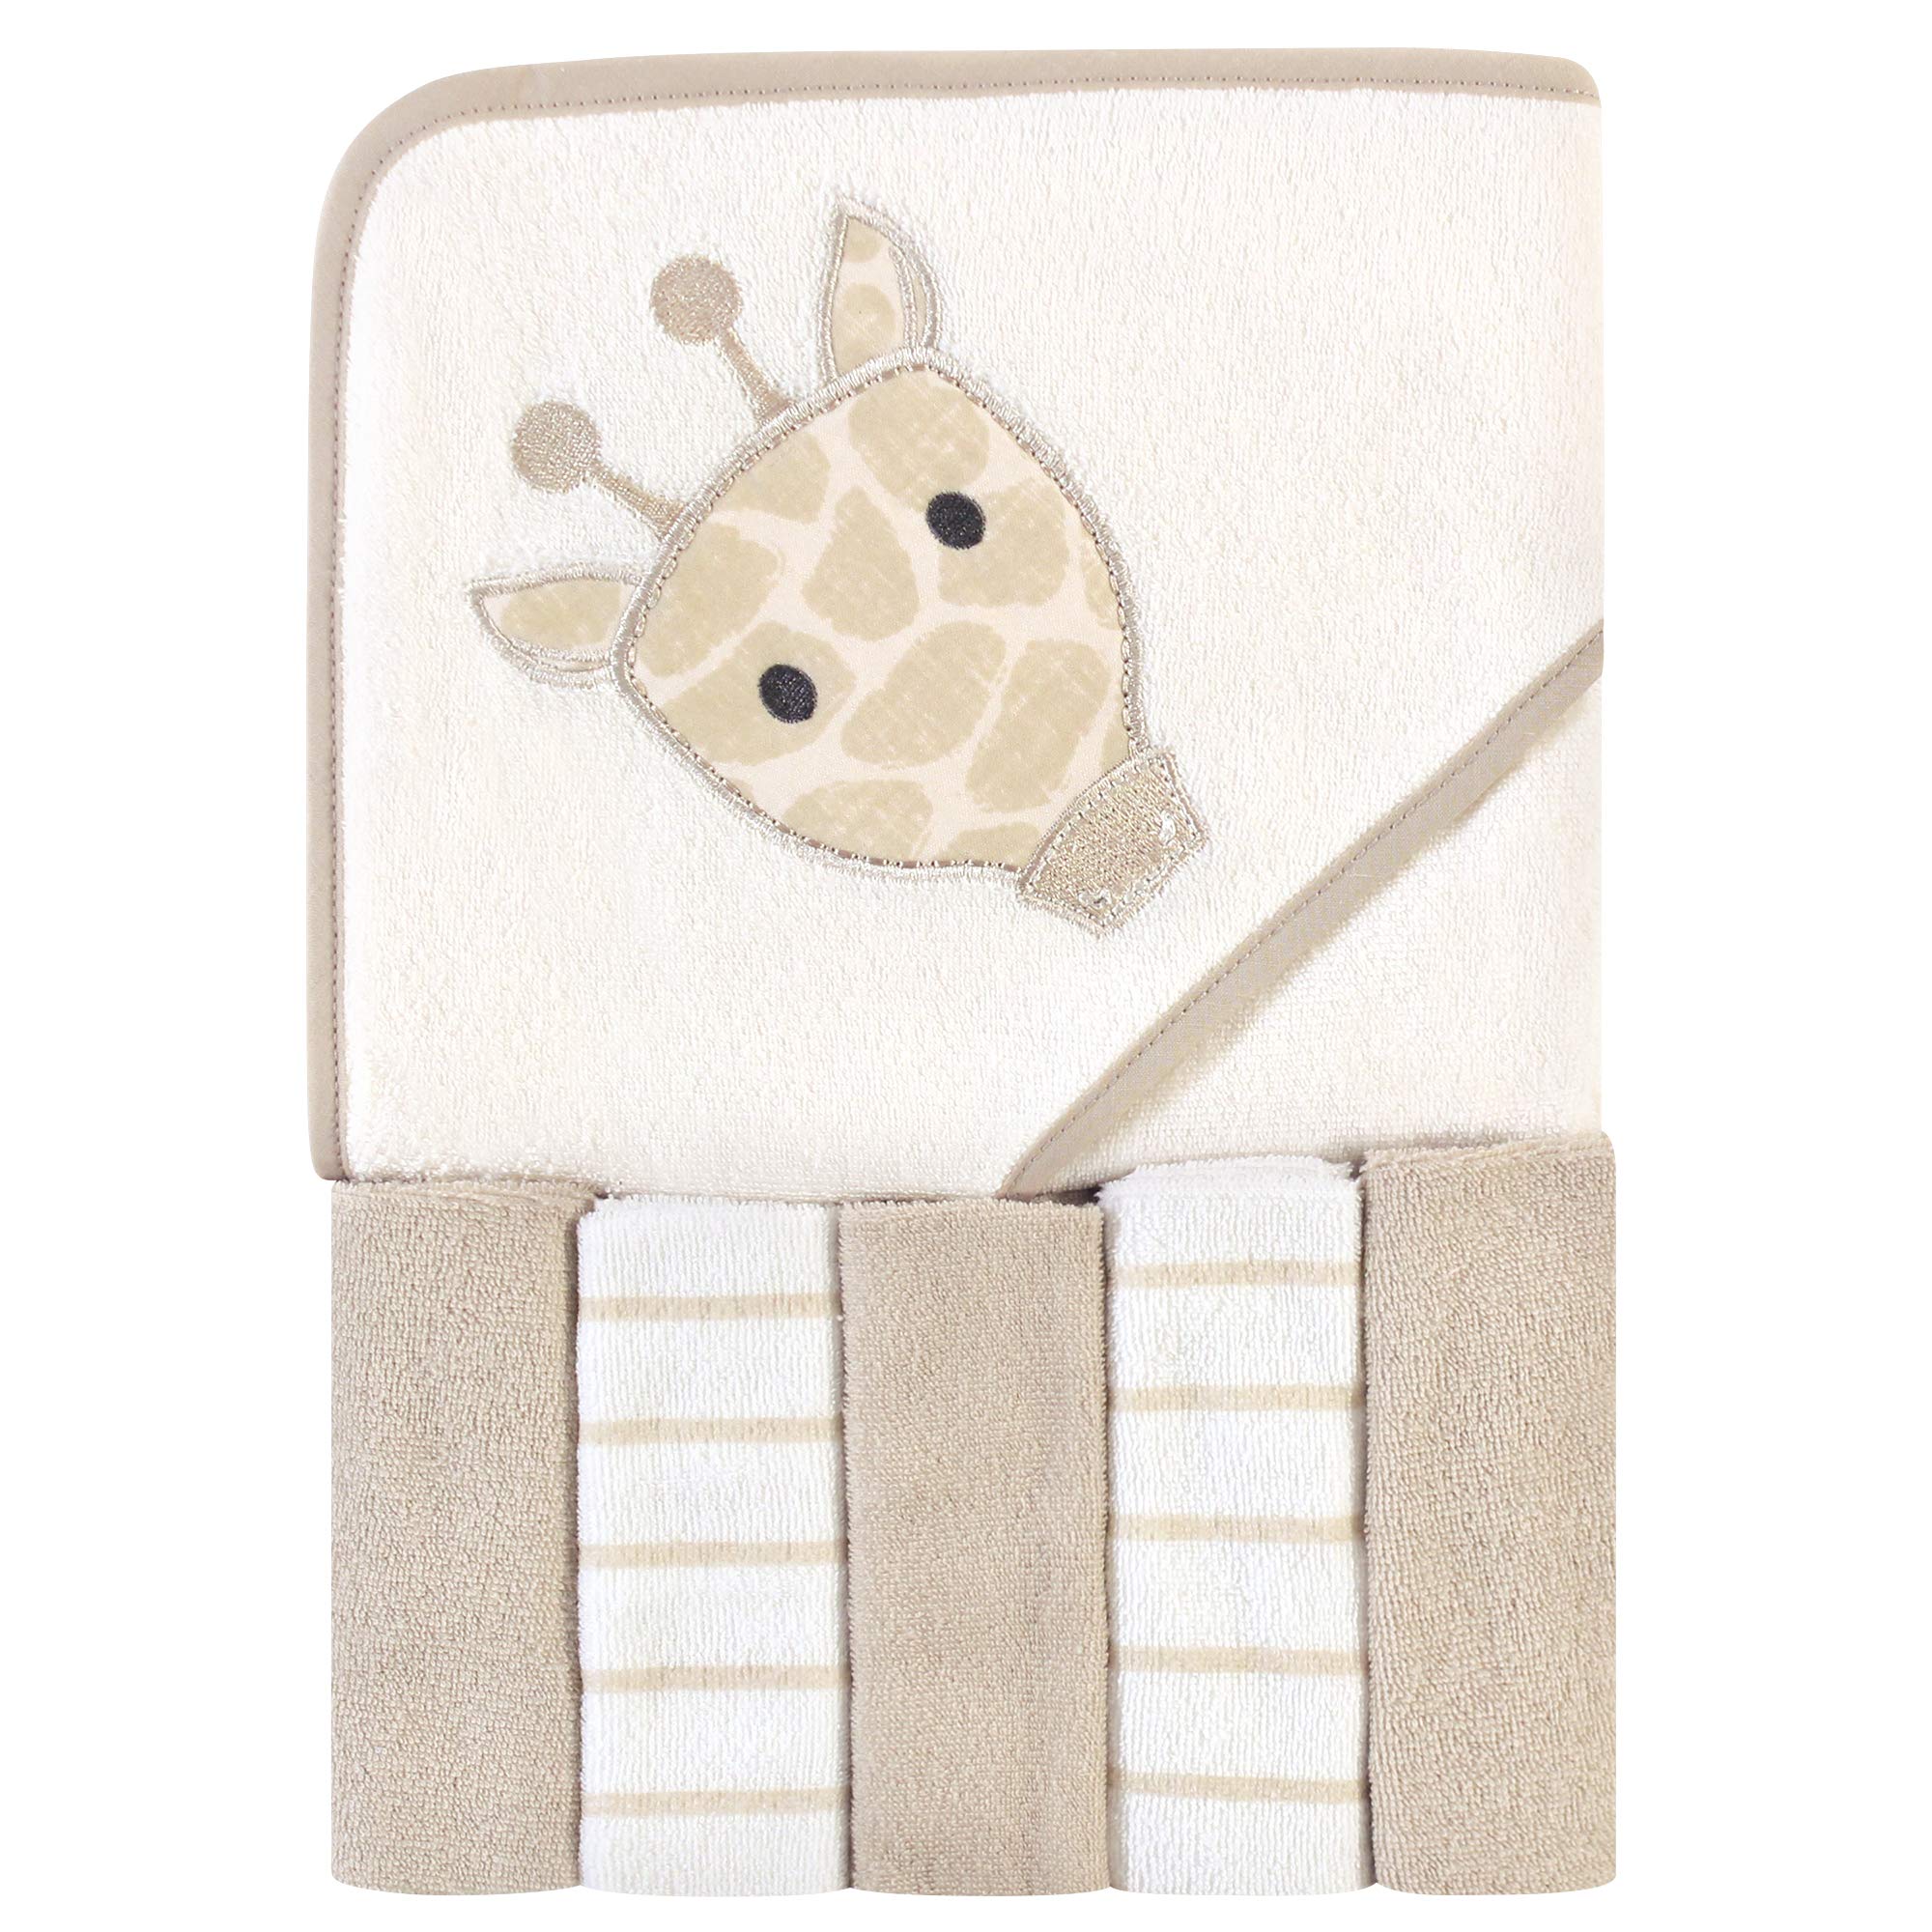 Hudson Baby Unisex Baby Hooded Towel and Five Washcloths, Modern Giraffe, One Size